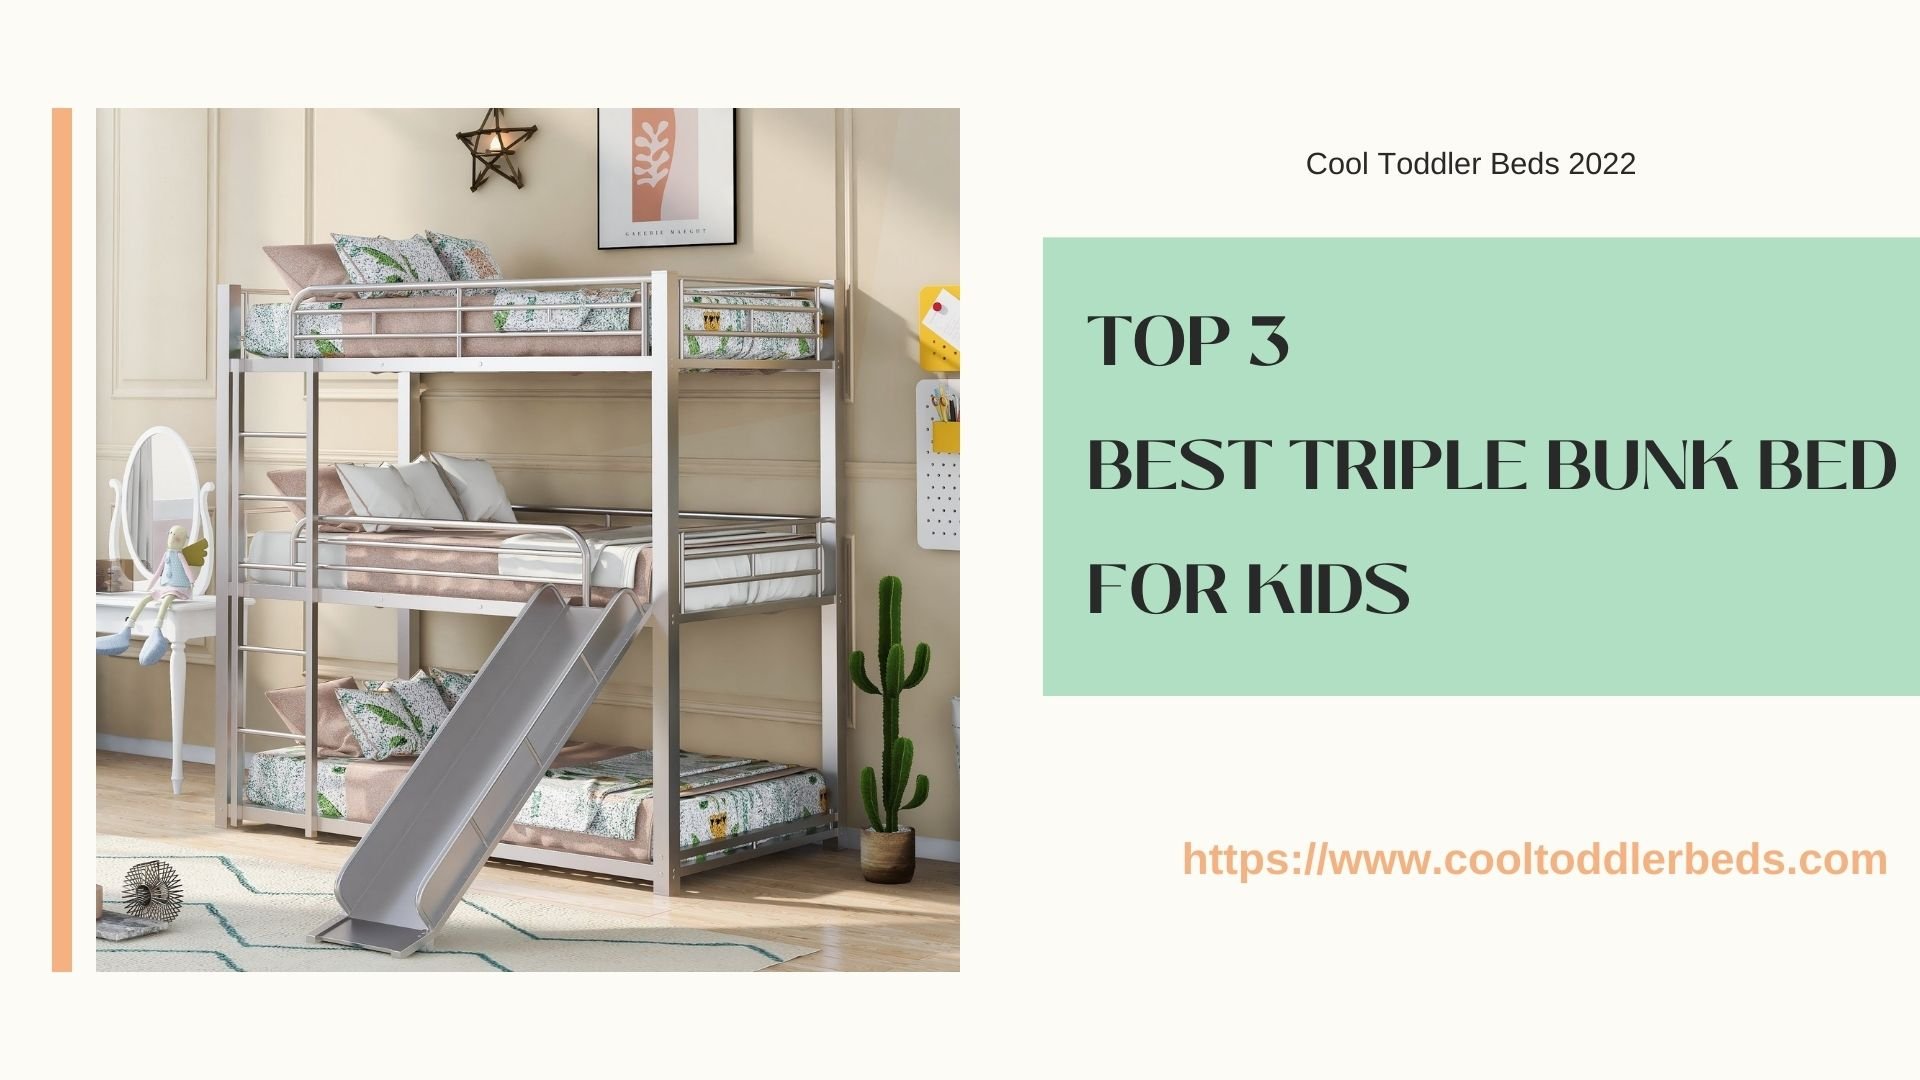 Choosing the Best Triple Bunk Bed for Kids – 2022’s Top 3 Options Revealed